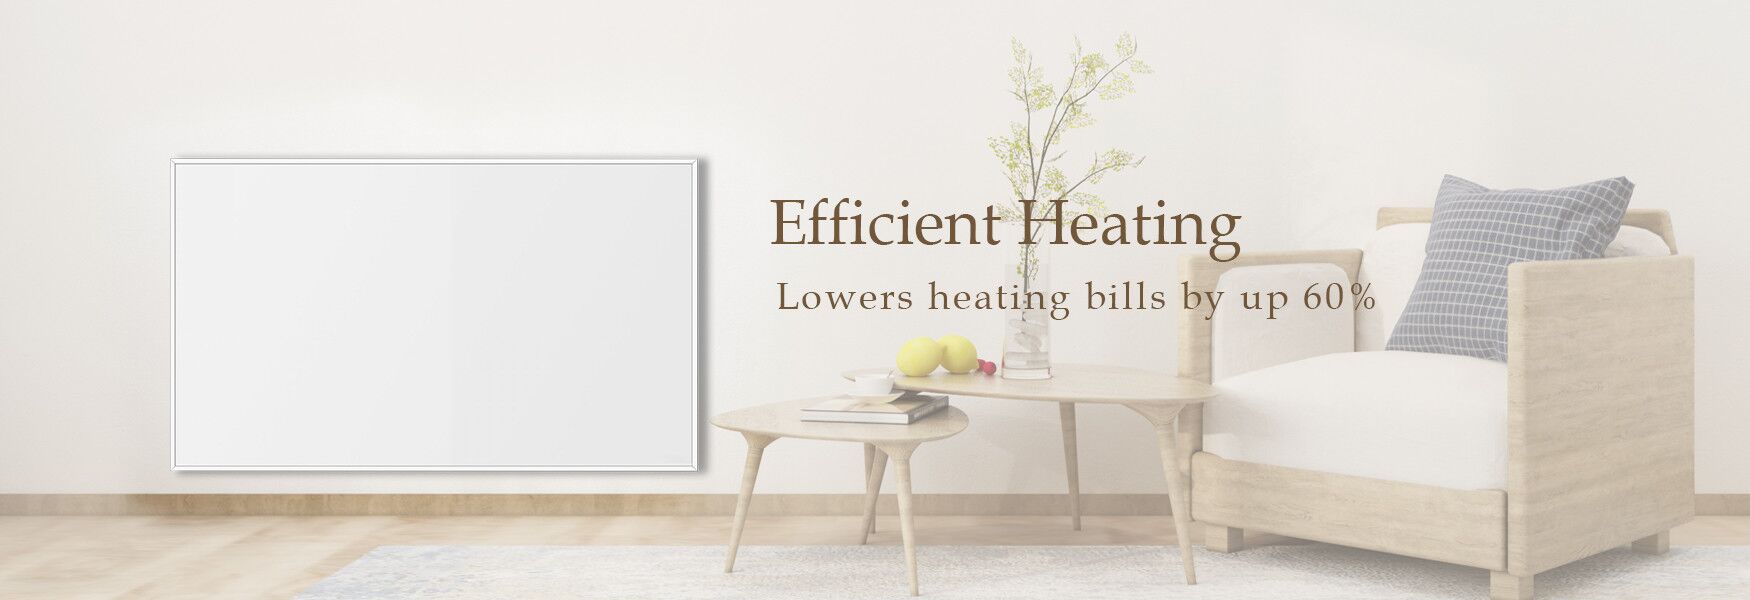 Ecoway Energy System Engineering Co. Ltd Releases A Wide Variety Of Energy-efficient Modern Infrared Heating Solutions To Save Warm Cost